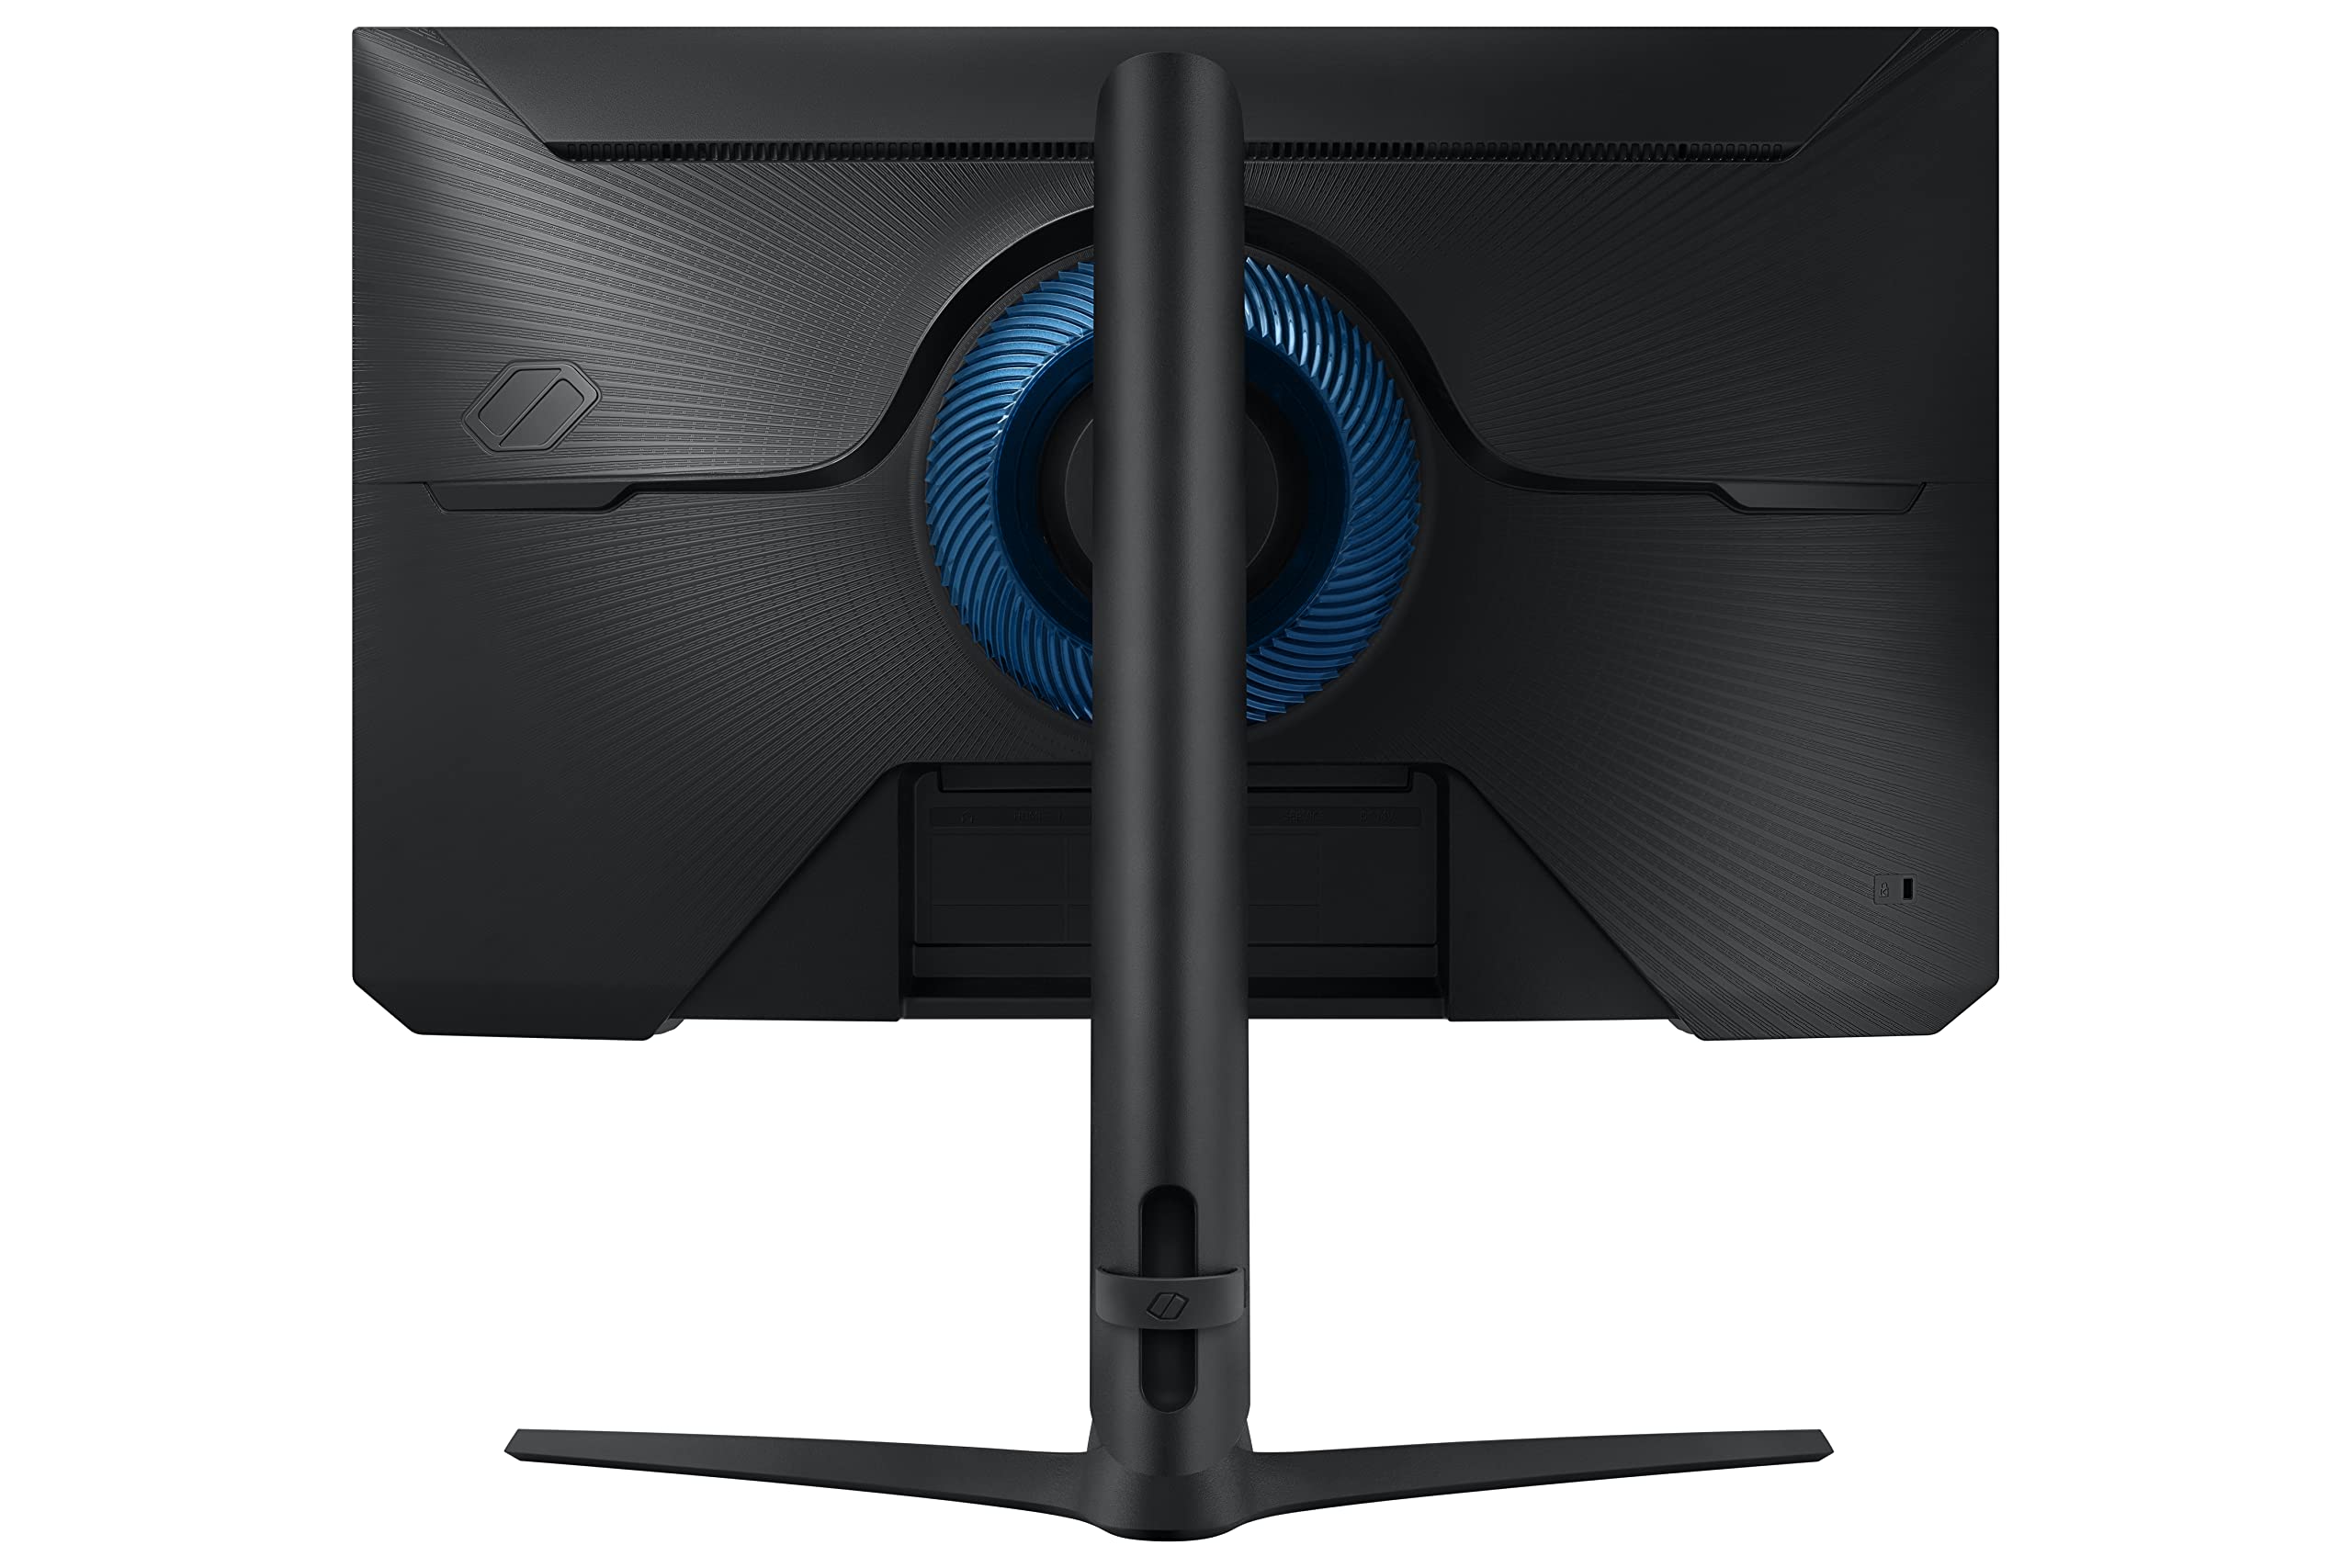 SAMSUNG Odyssey G4 Series 25-Inch FHD Gaming Monitor, IPS, 240Hz, 1ms, G-Sync Compatible, AMD FreeSync Premium, HDR10, Ultrawide Game View, DisplayPort, HDMI, Fully Adjustable Stand (LS25BG402ENXGO)